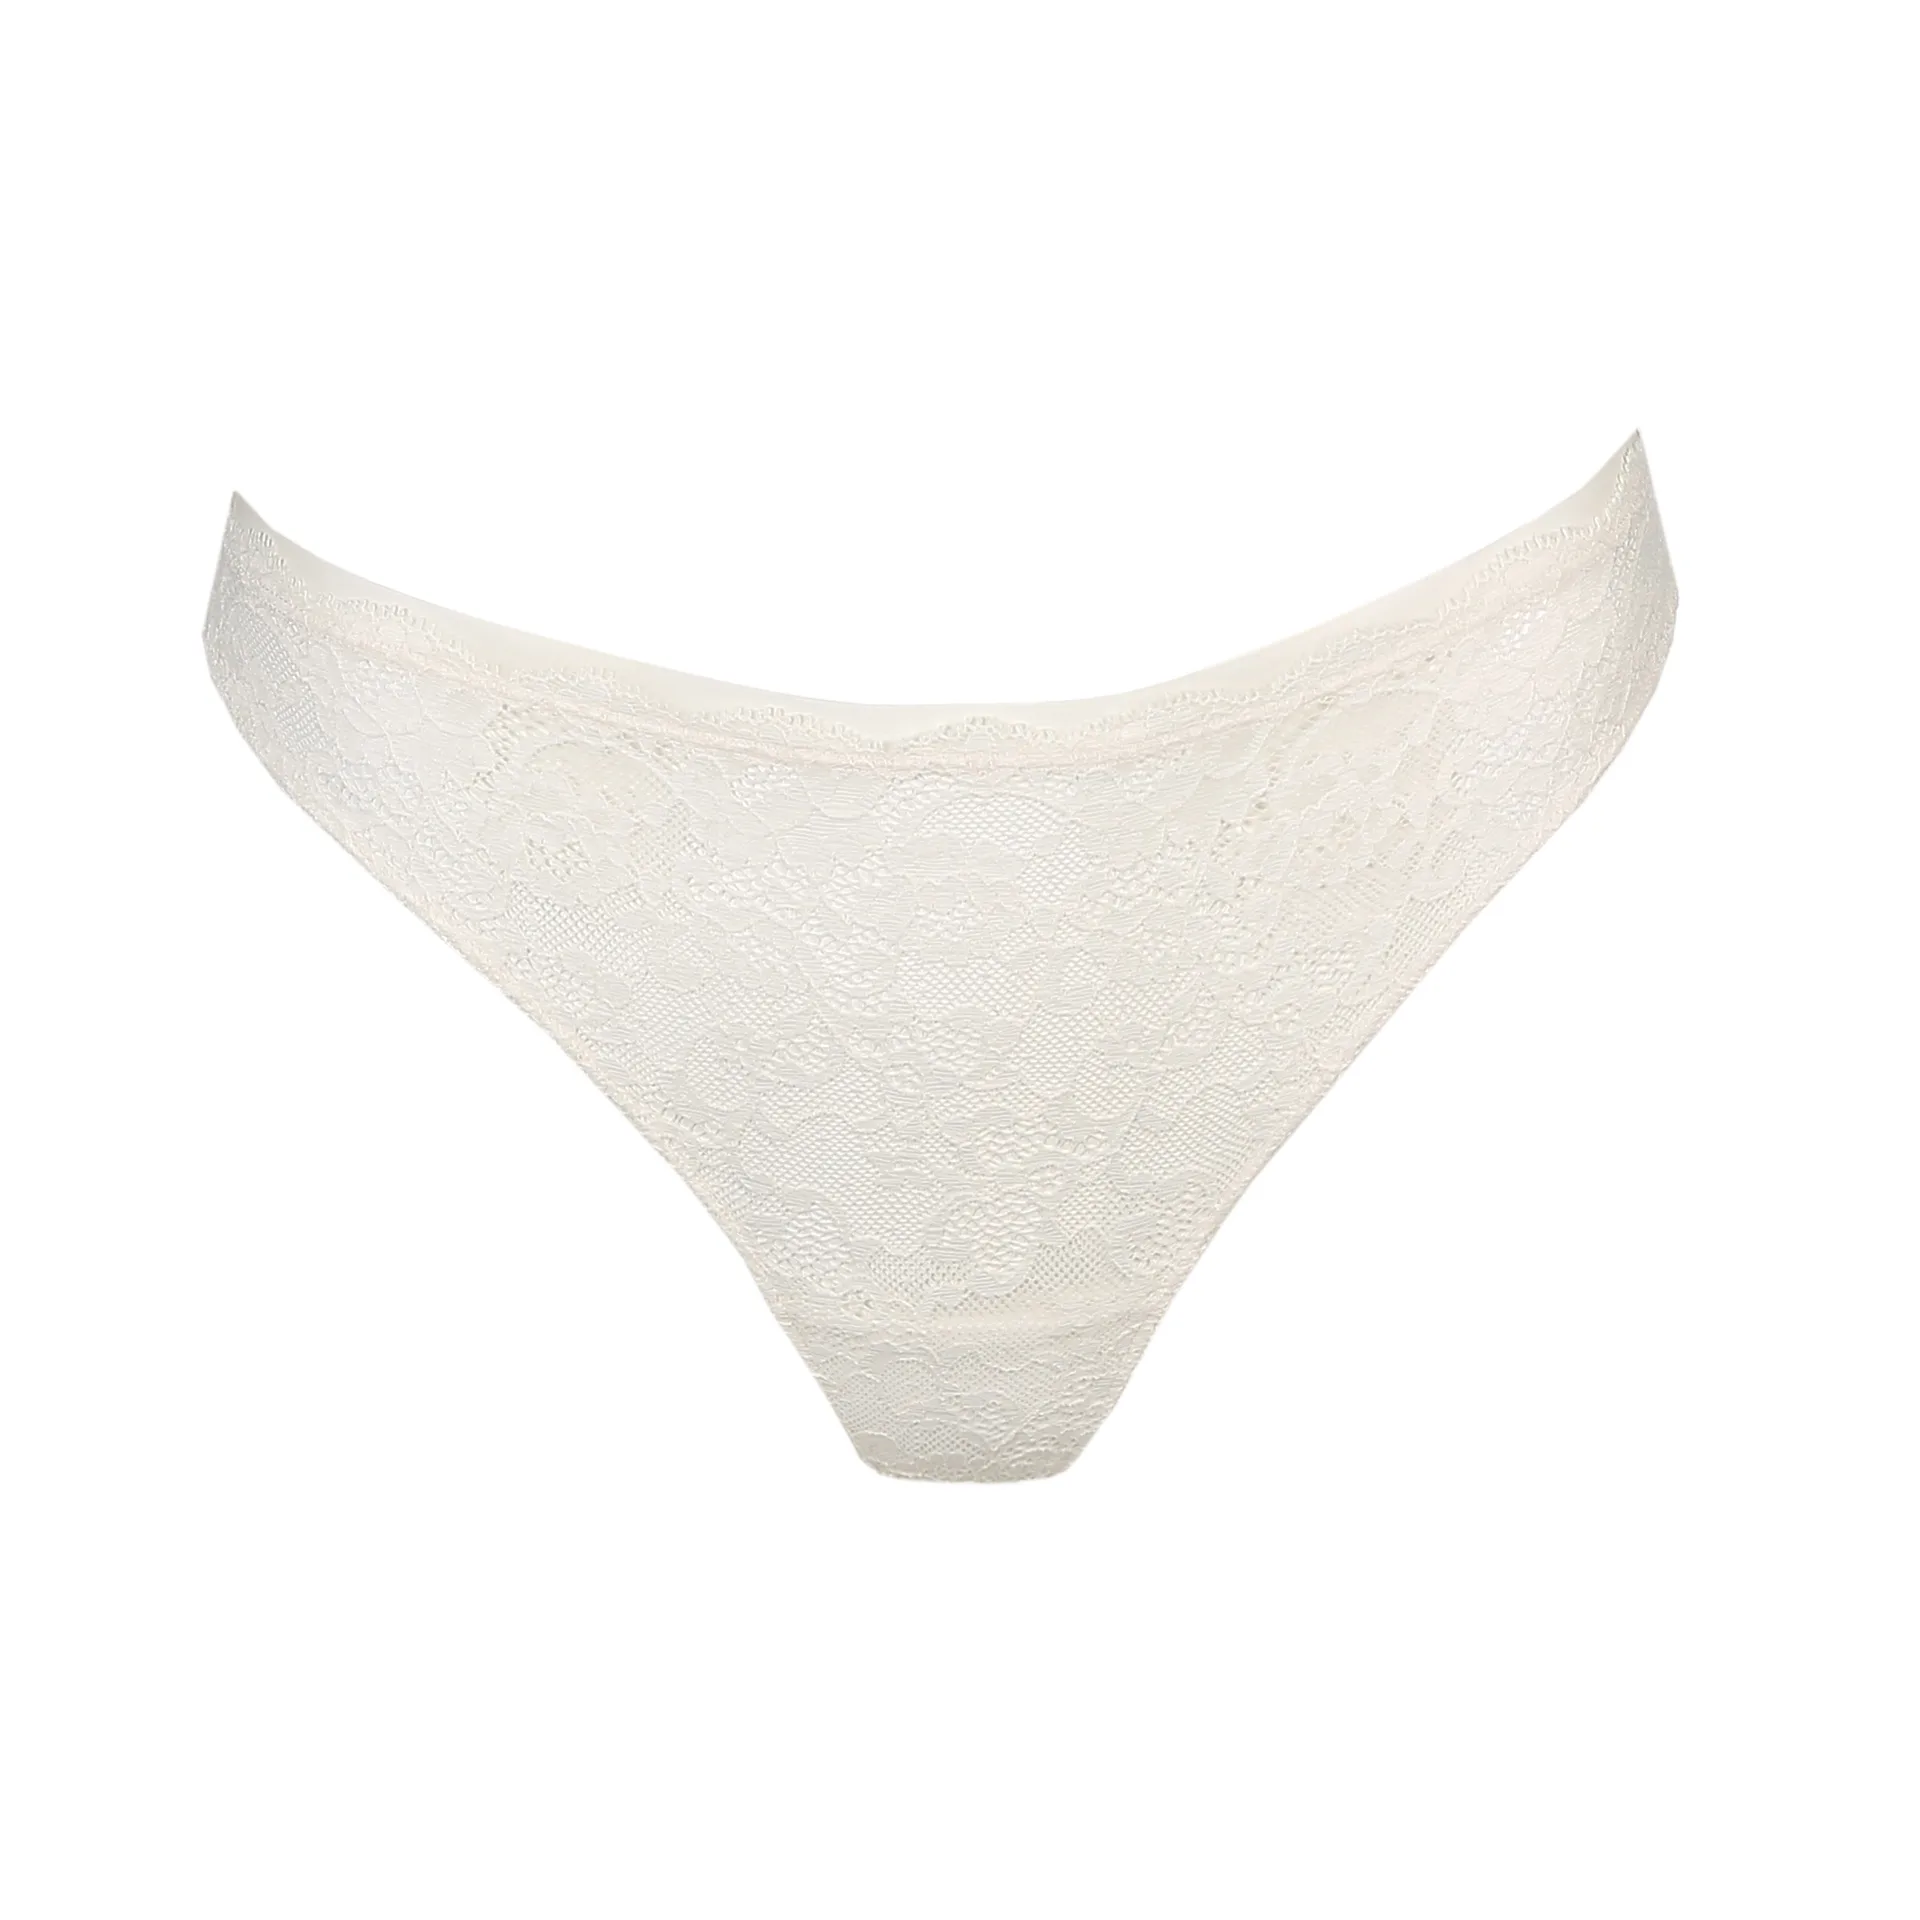 Buy Cotton On Body Ultimate Comfort Lace Tanga G String Brief Online